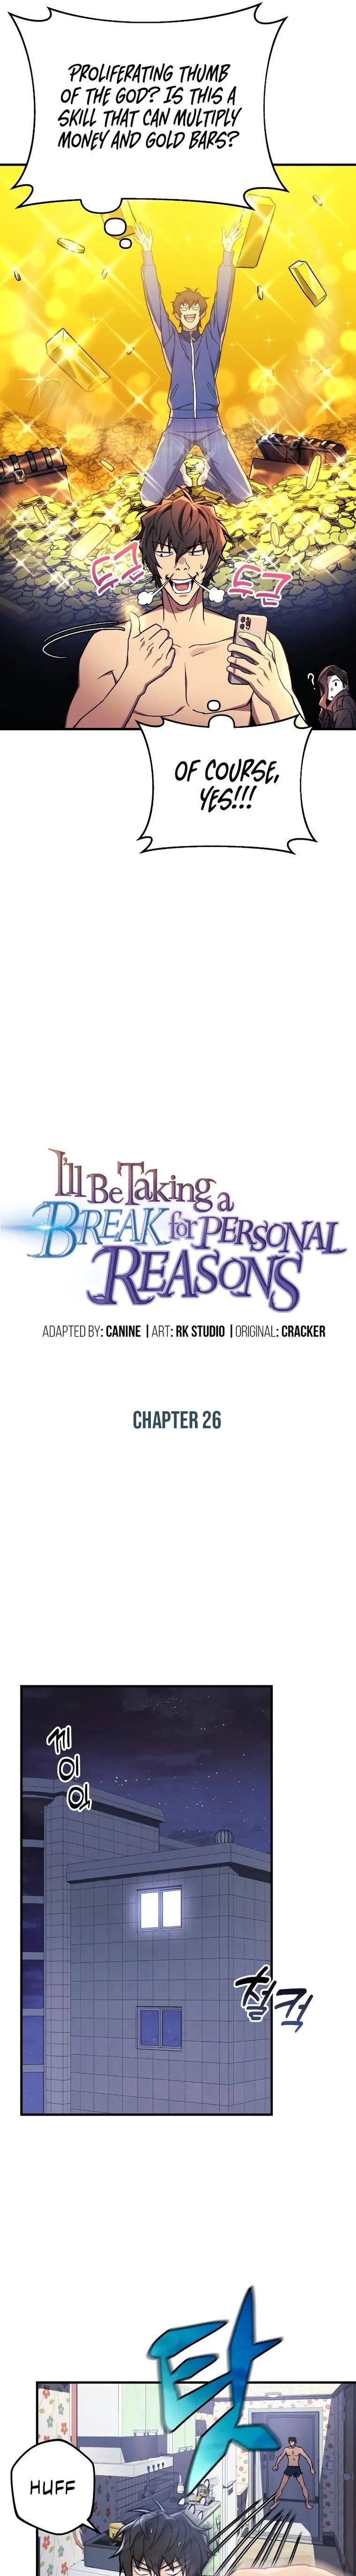 I’ll be Taking a Break for Personal Reasons chapter 26